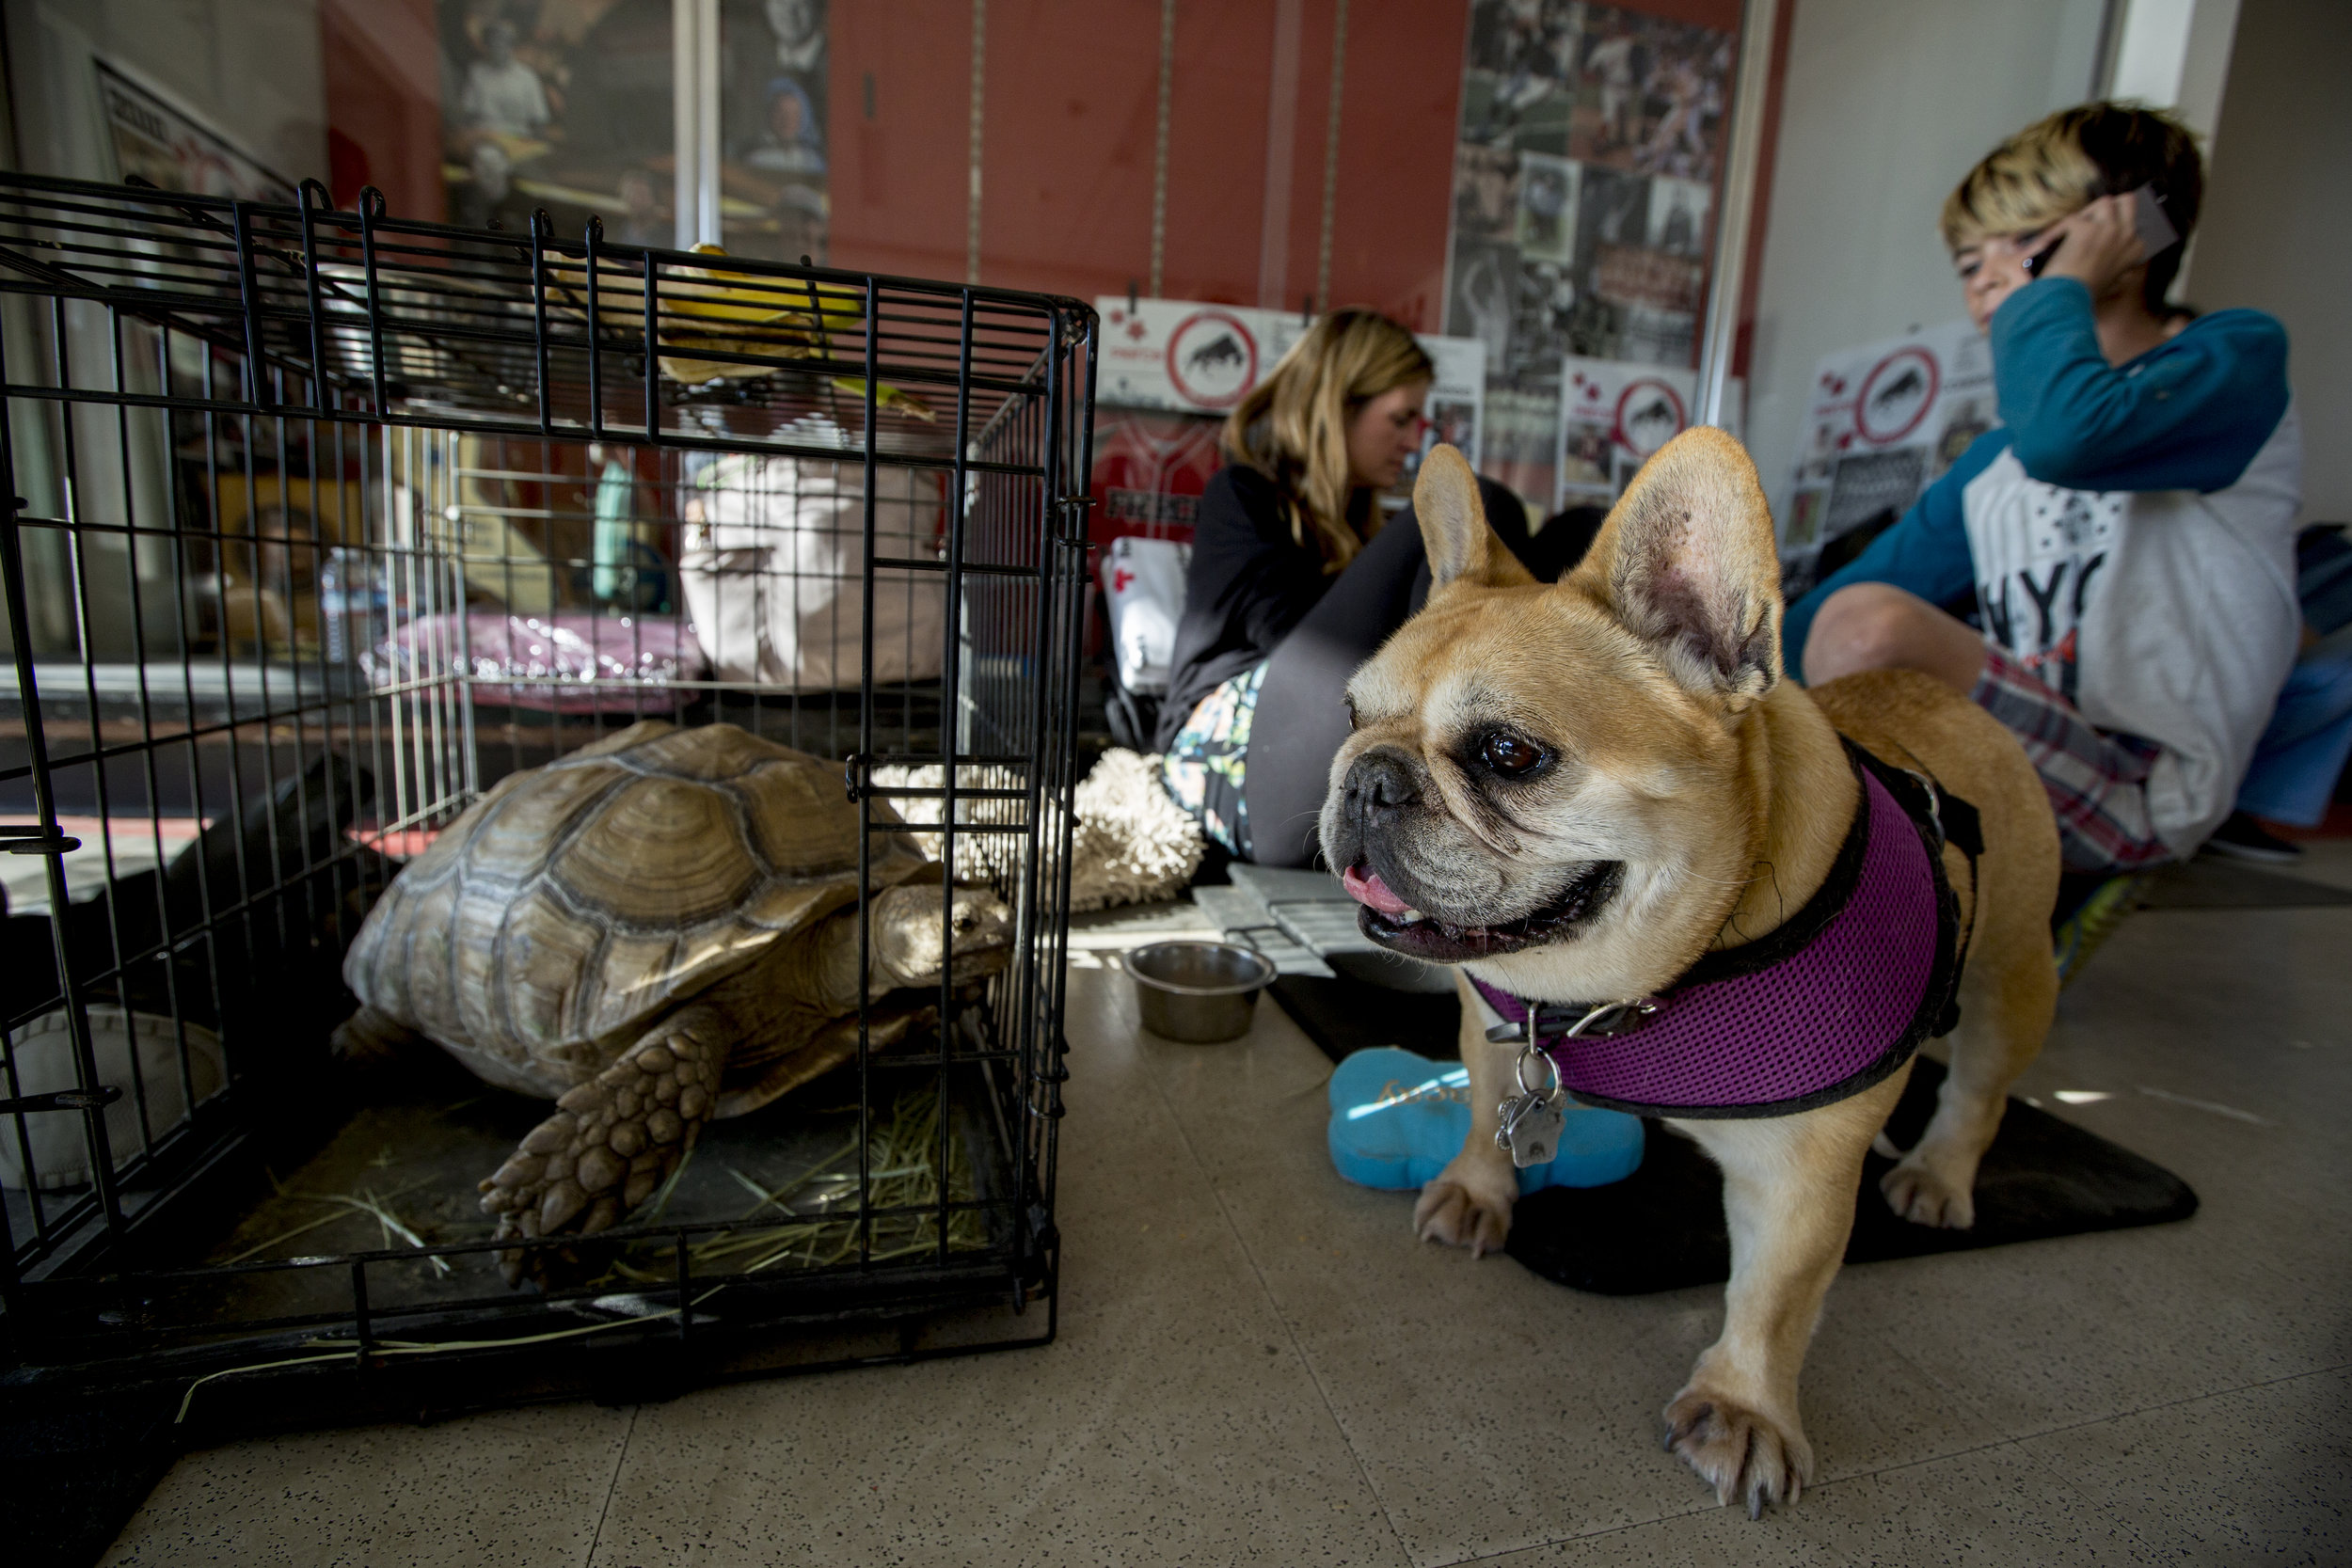  Stella the French Bulldog (right) stands alert while her owner, Stephania D'Amore (center-back), settles in with the rest of the family and pets at the Woolsey fire evacuation center set up at Los Angeles Pierce College on November 9, 2018 in Woodla